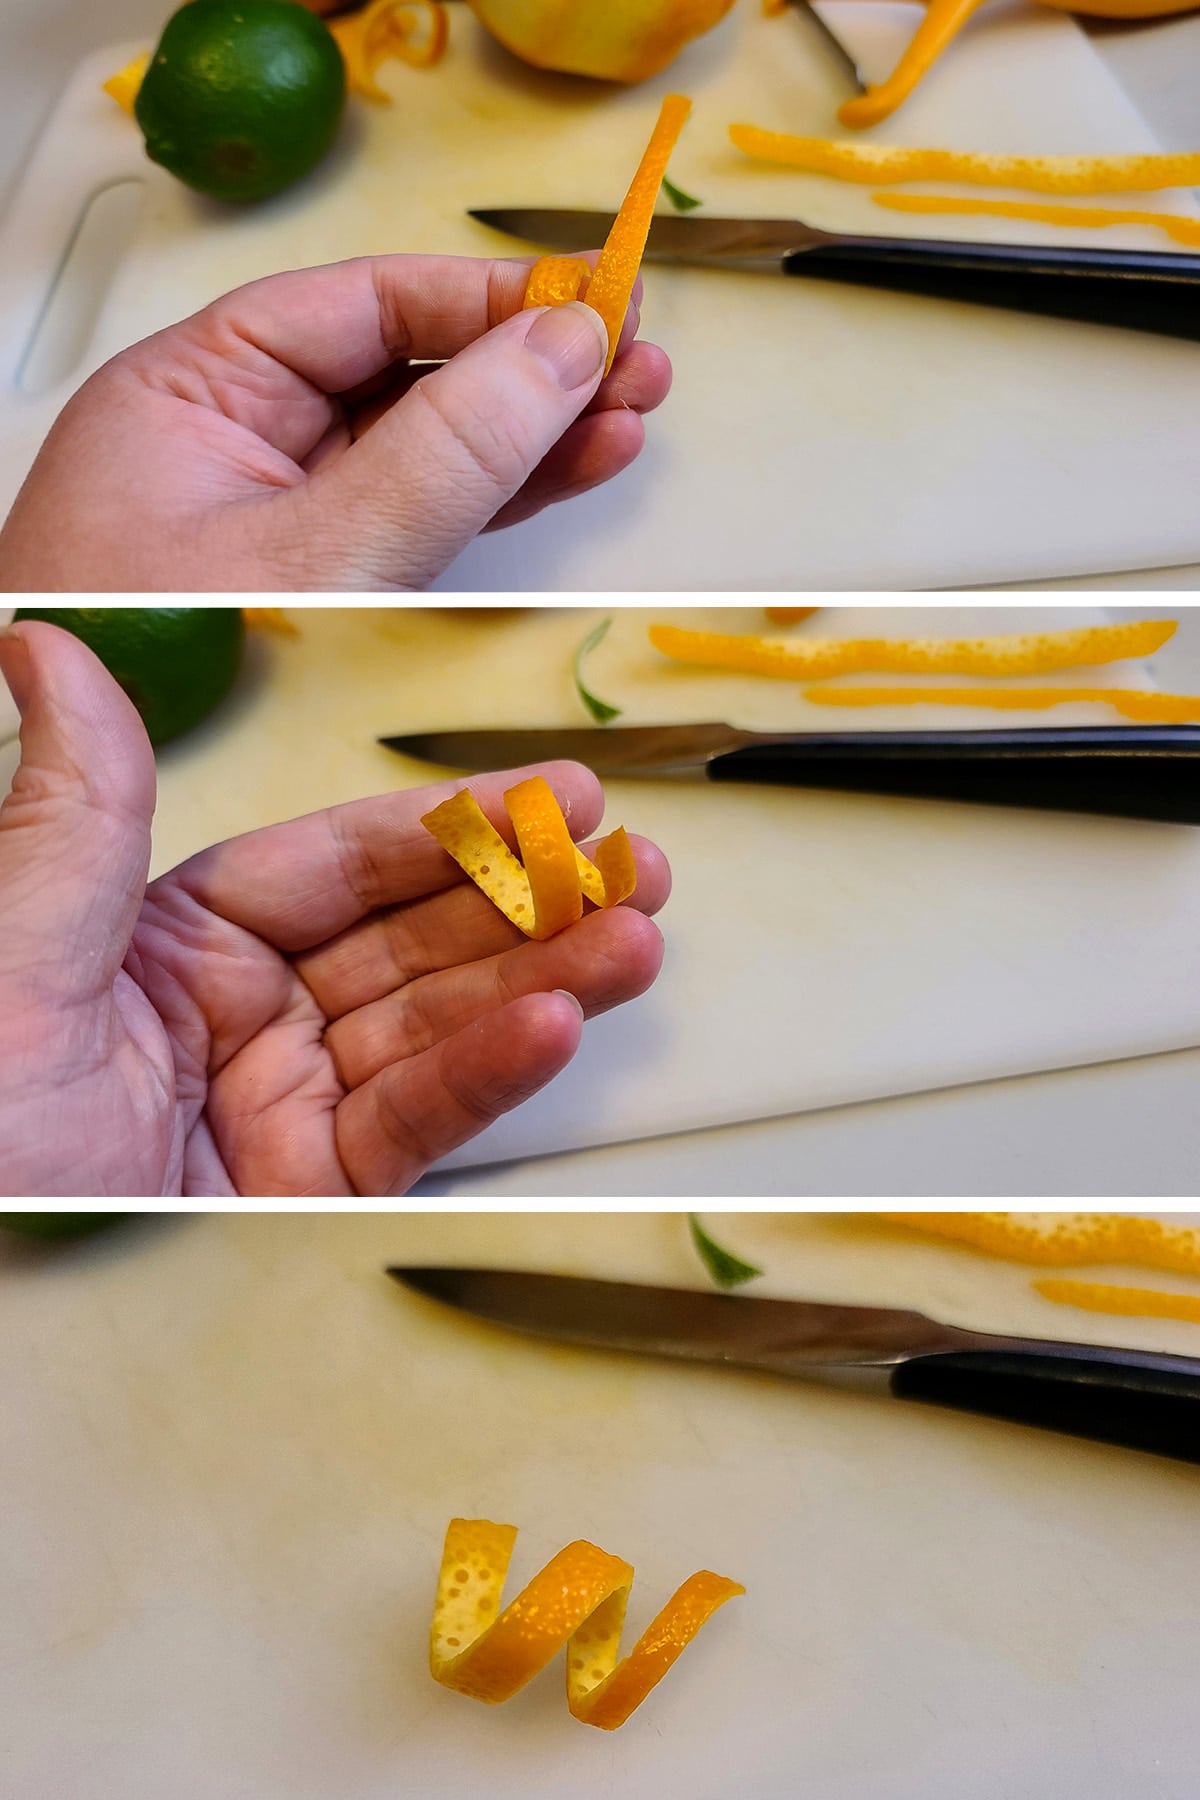 A 3 part compilation image showing a strip of orange peel being twisted into a curl garnish.